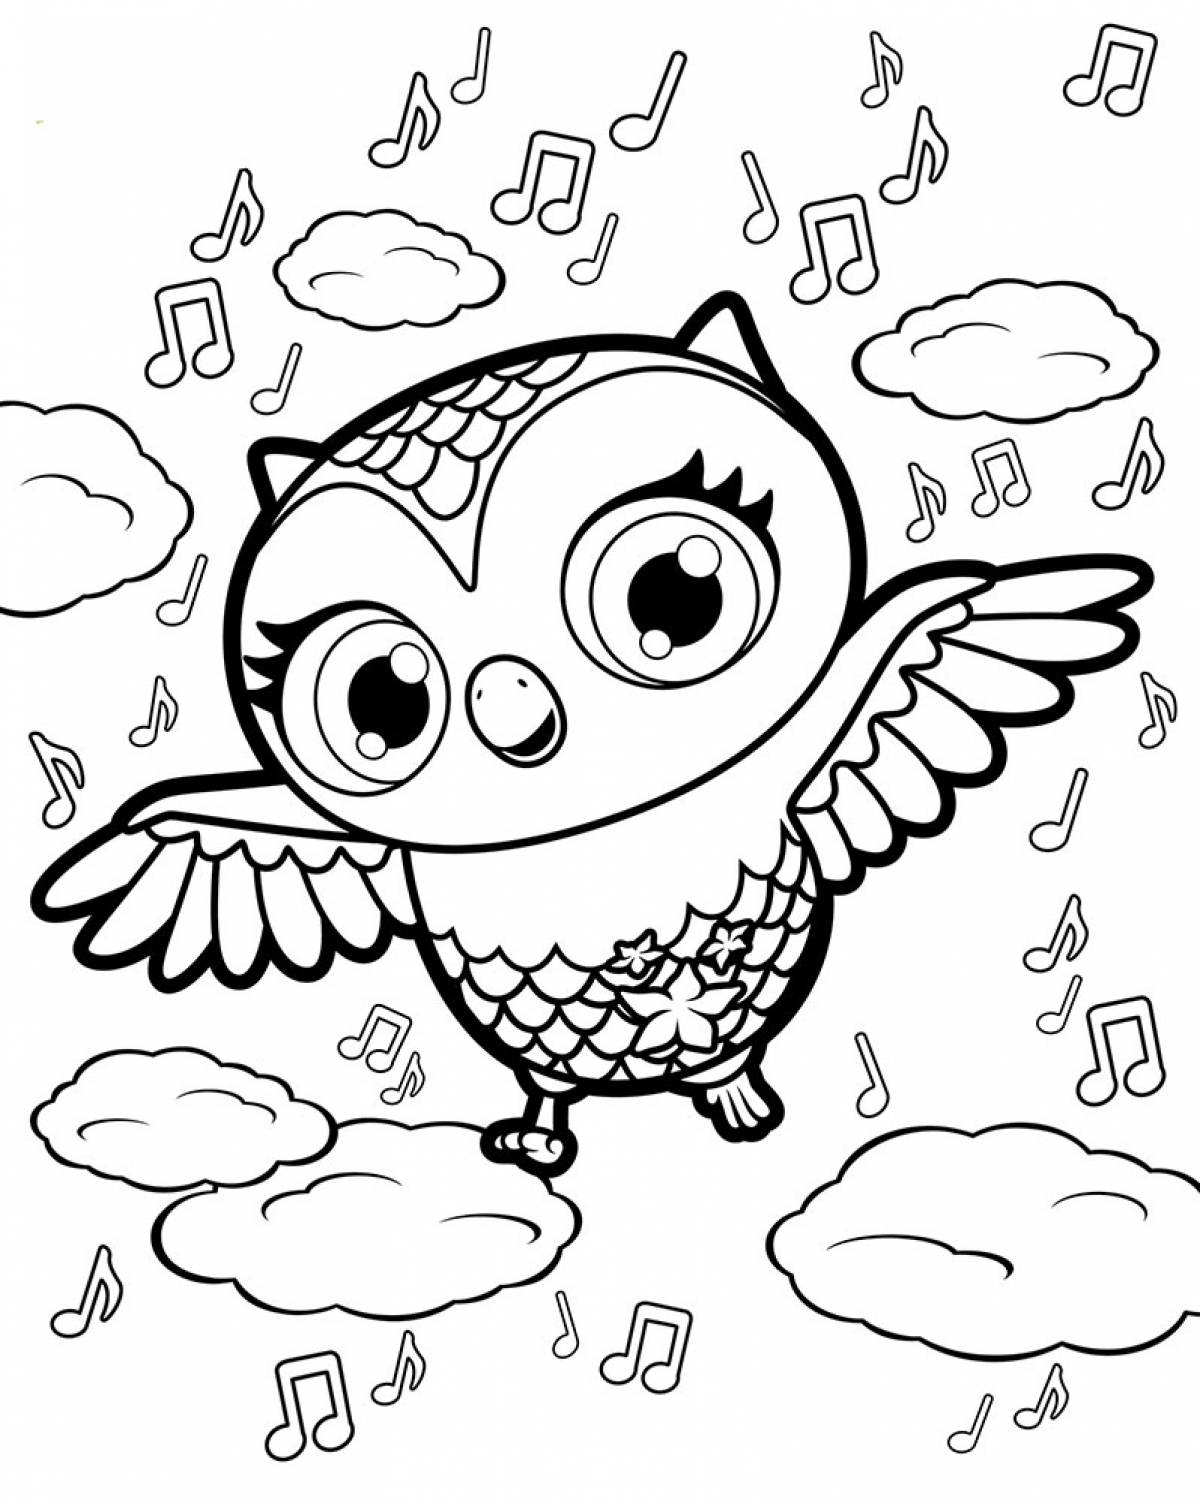 Owl and notes